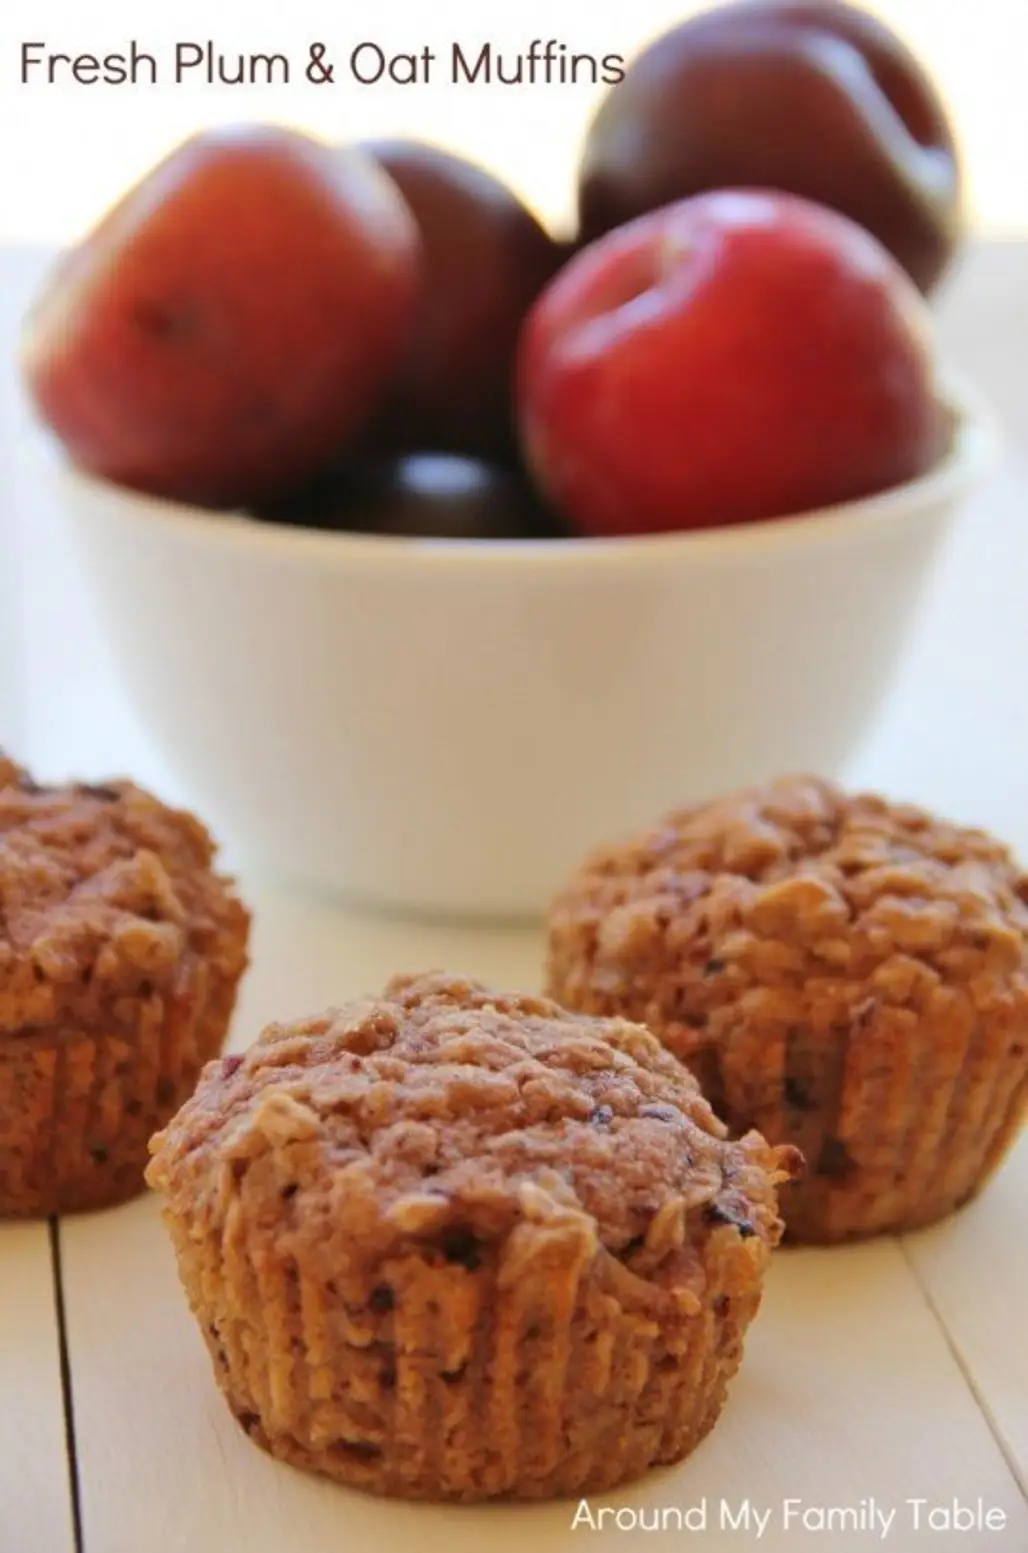 Plum and Oat Muffins